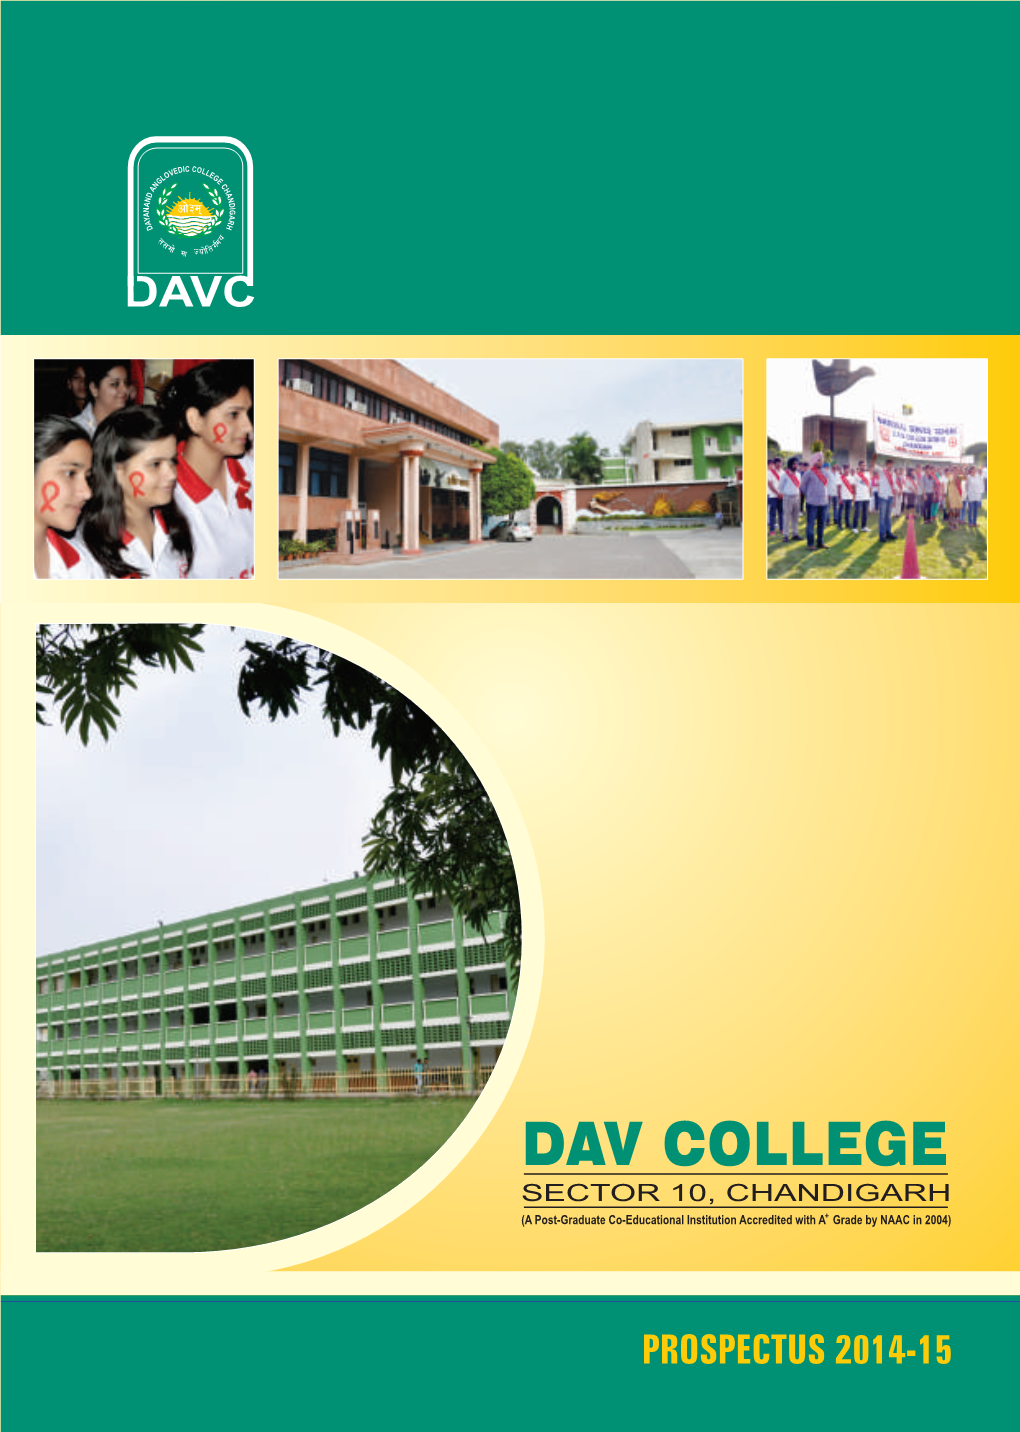 DAV COLLEGE SECTOR 10, CHANDIGARH (A Post-Graduate Co-Educational Institution Accredited with A+ Grade by NAAC in 2004)